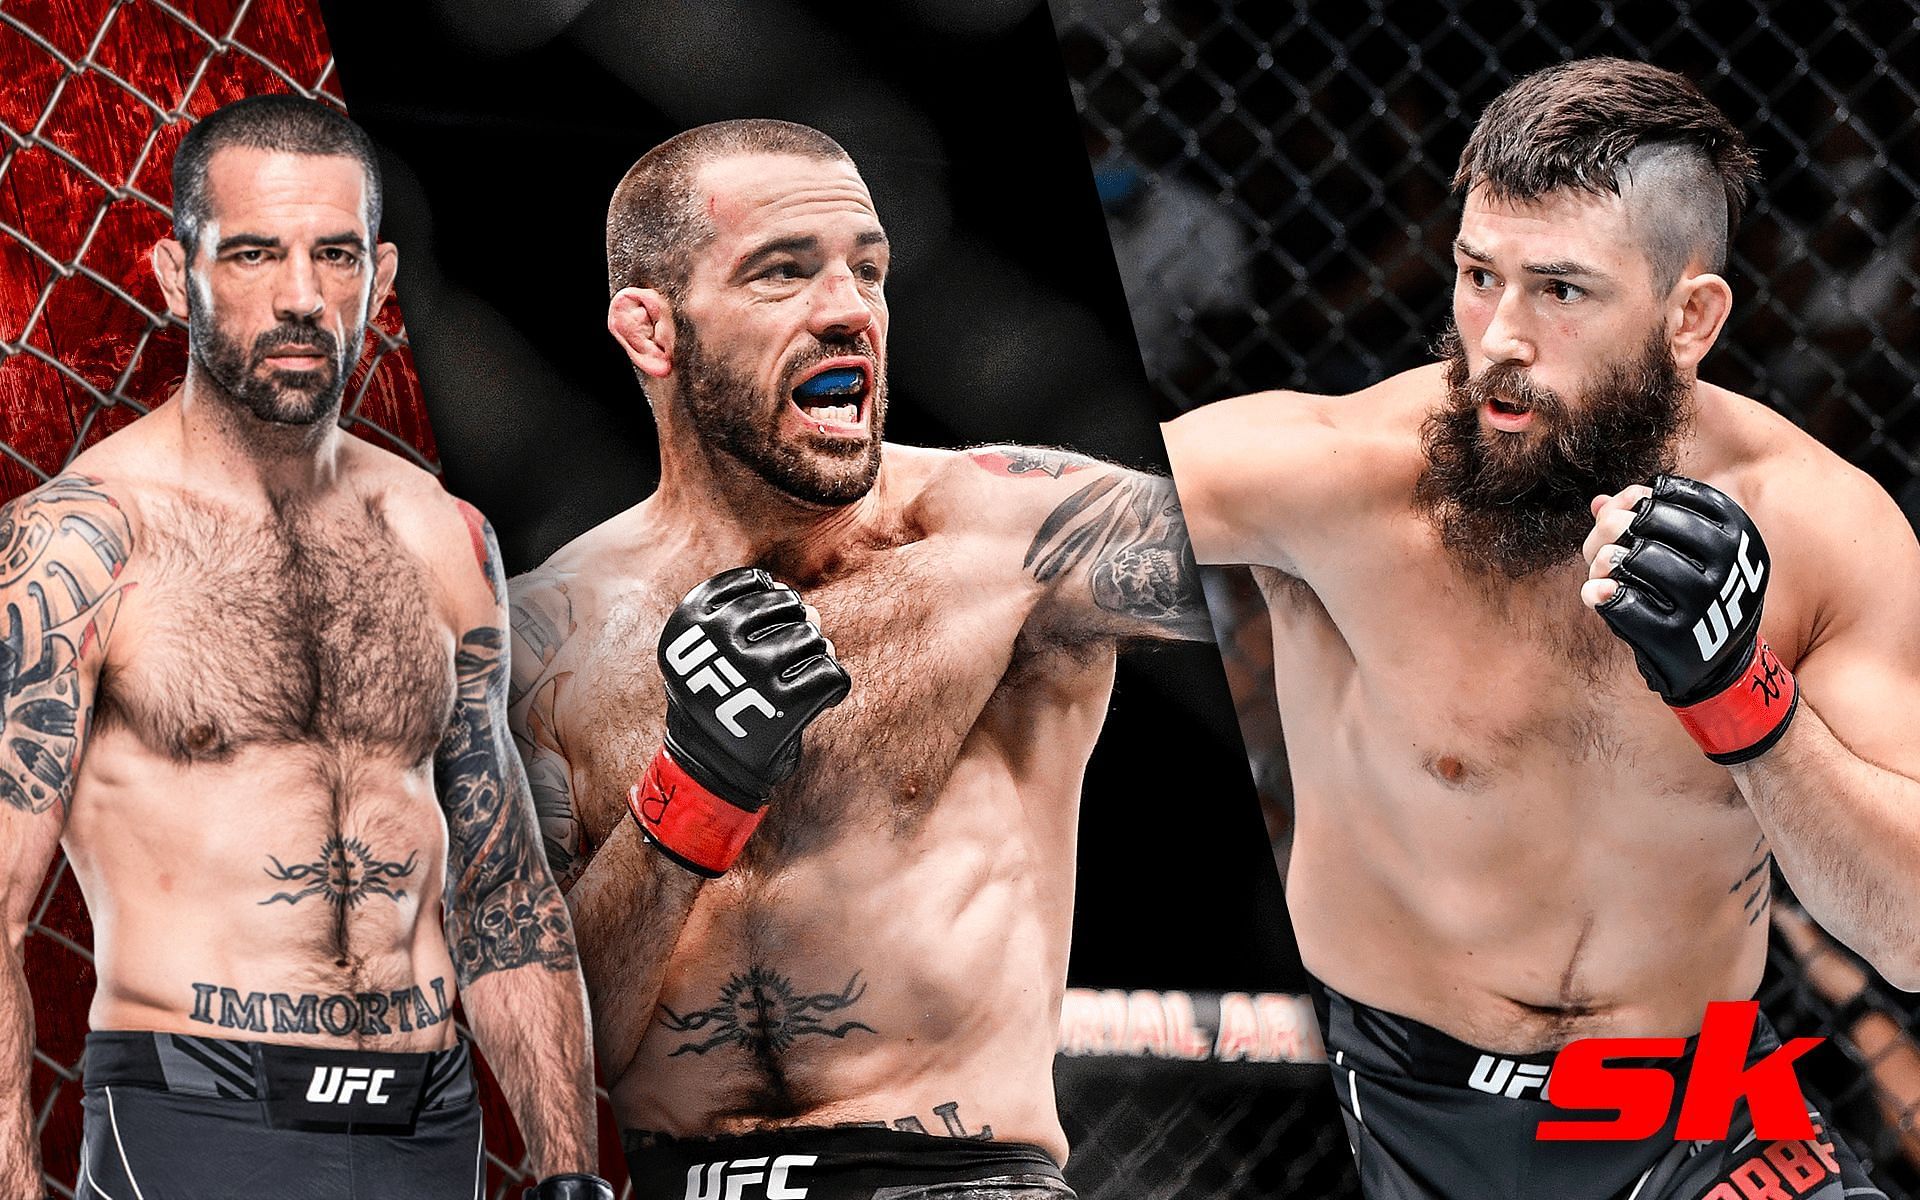 UFC welterweight veteran Matt Brown is set to return to the octagon this weekend to take on Bryan Barberena